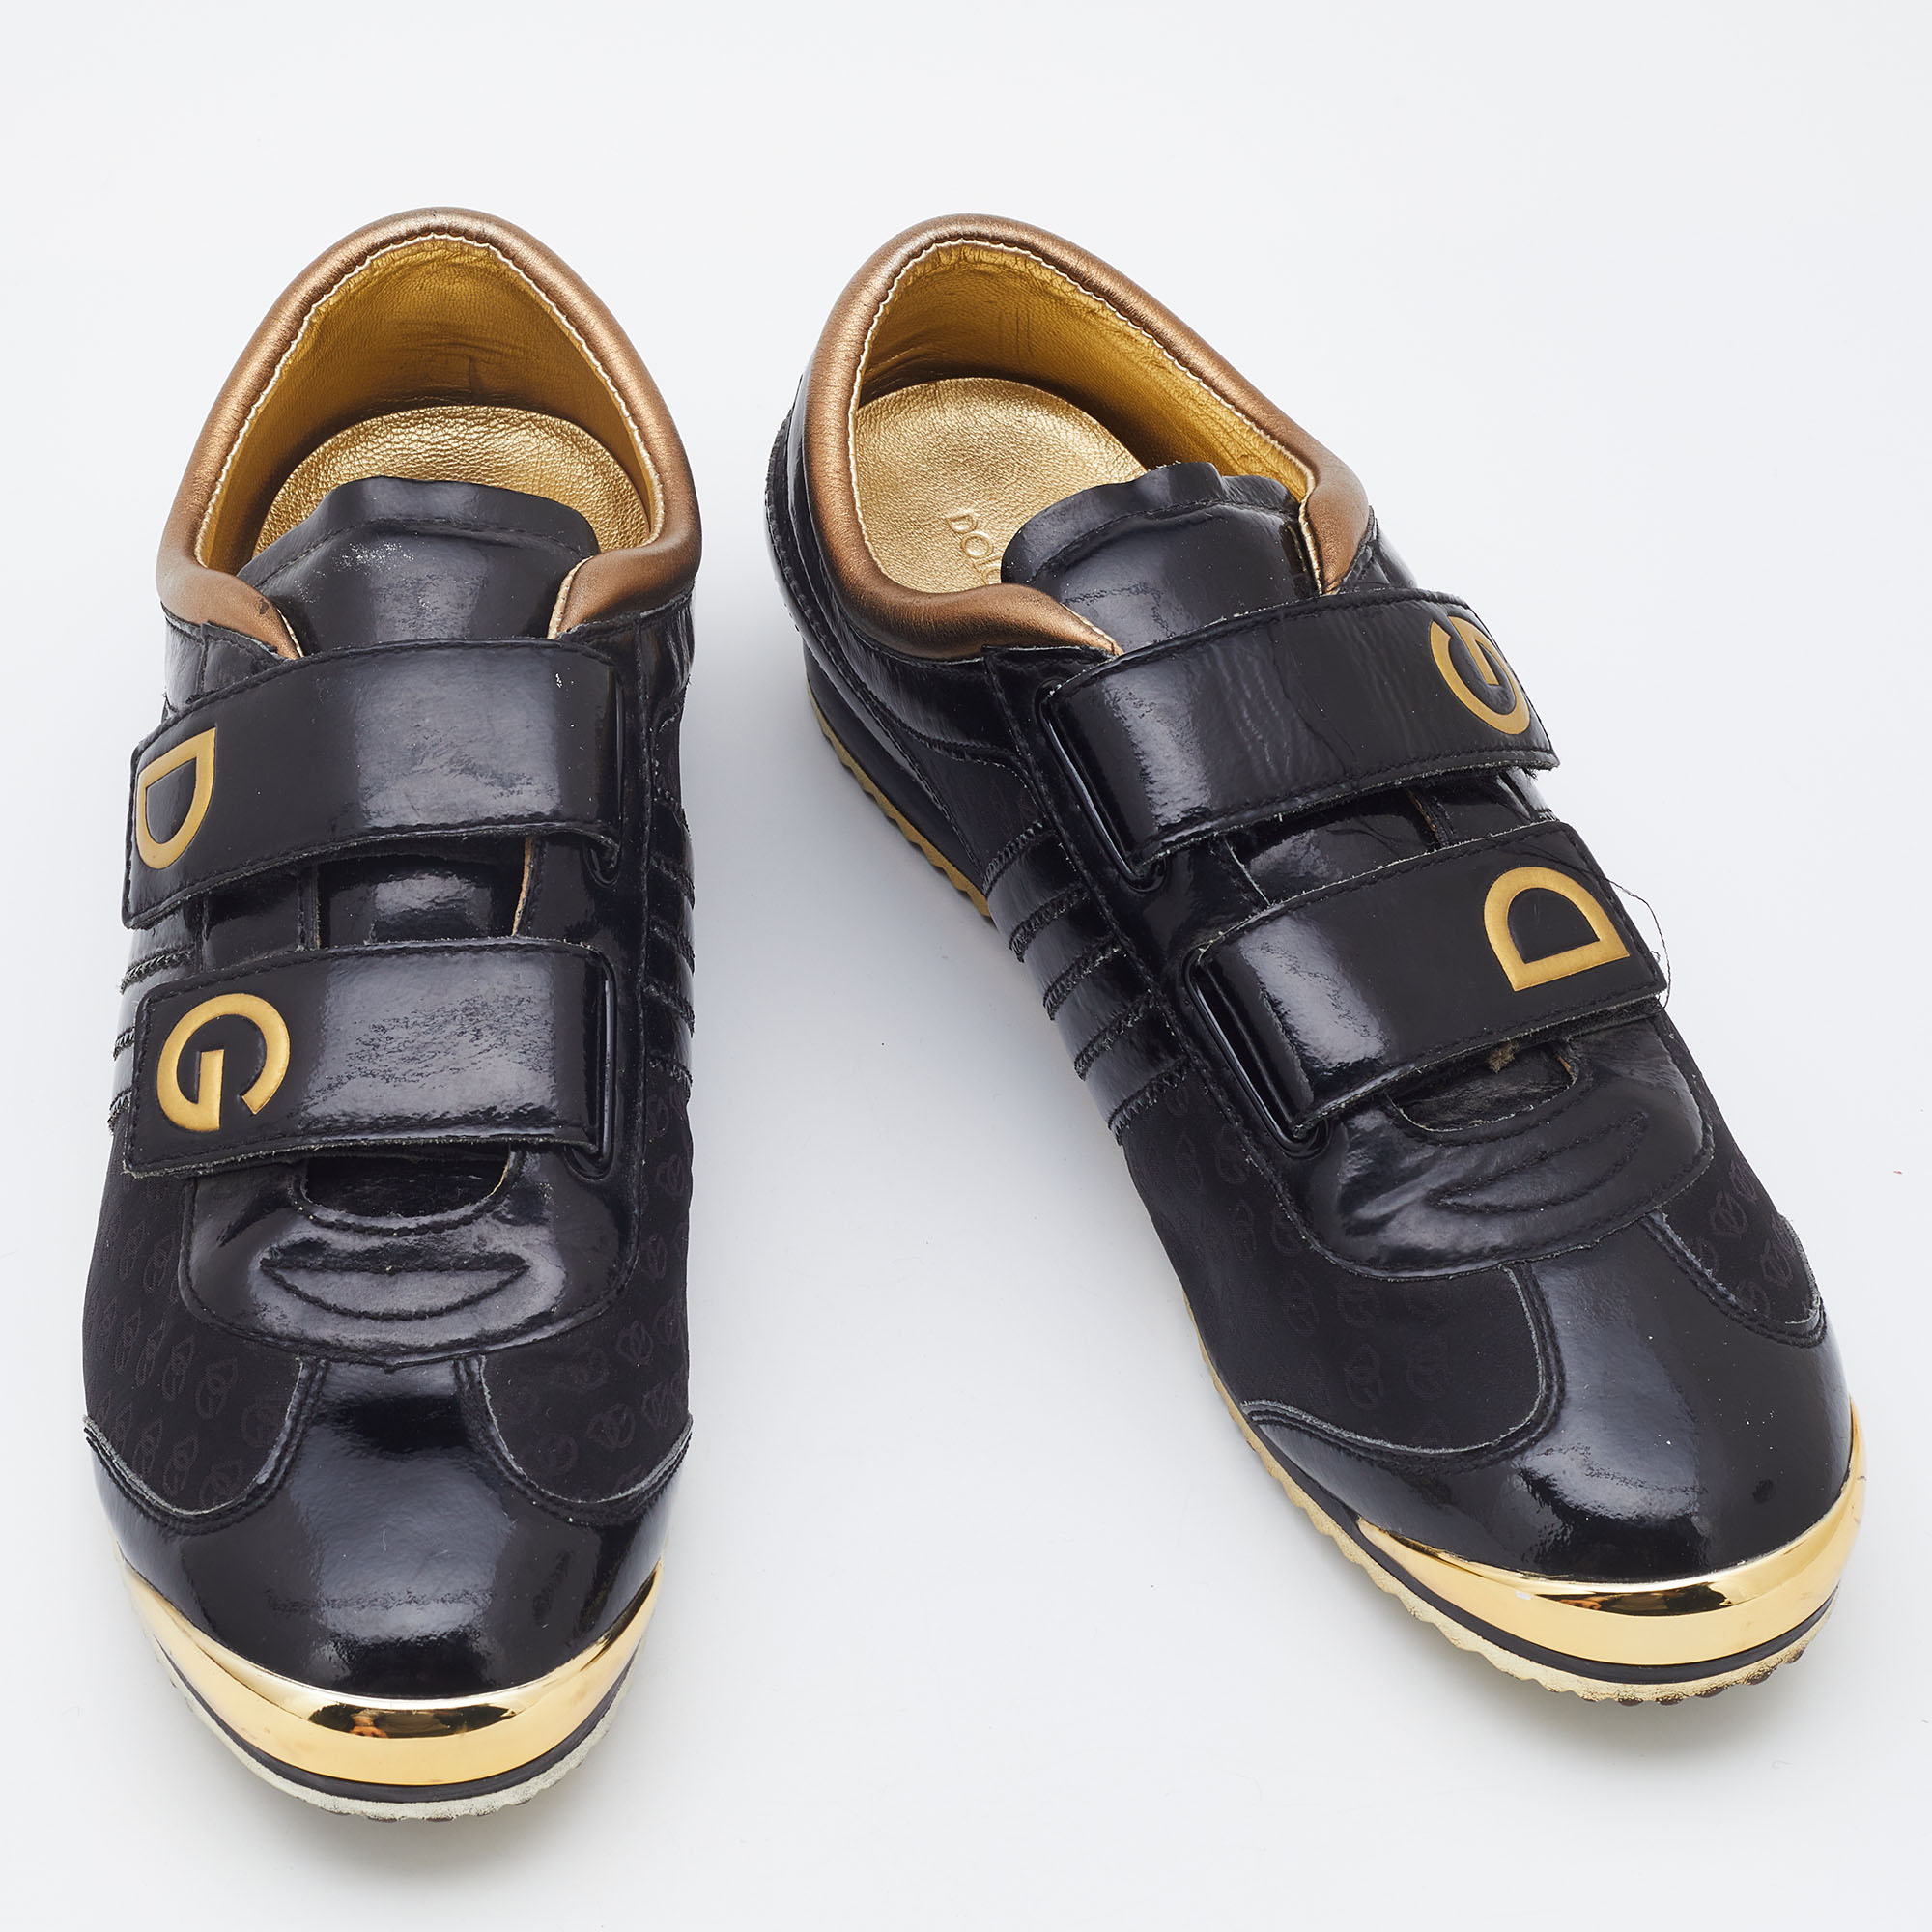 Dolce & Gabbana Black/Gold Patent Leather And Fabric DG Low Top Sneakers Size 40